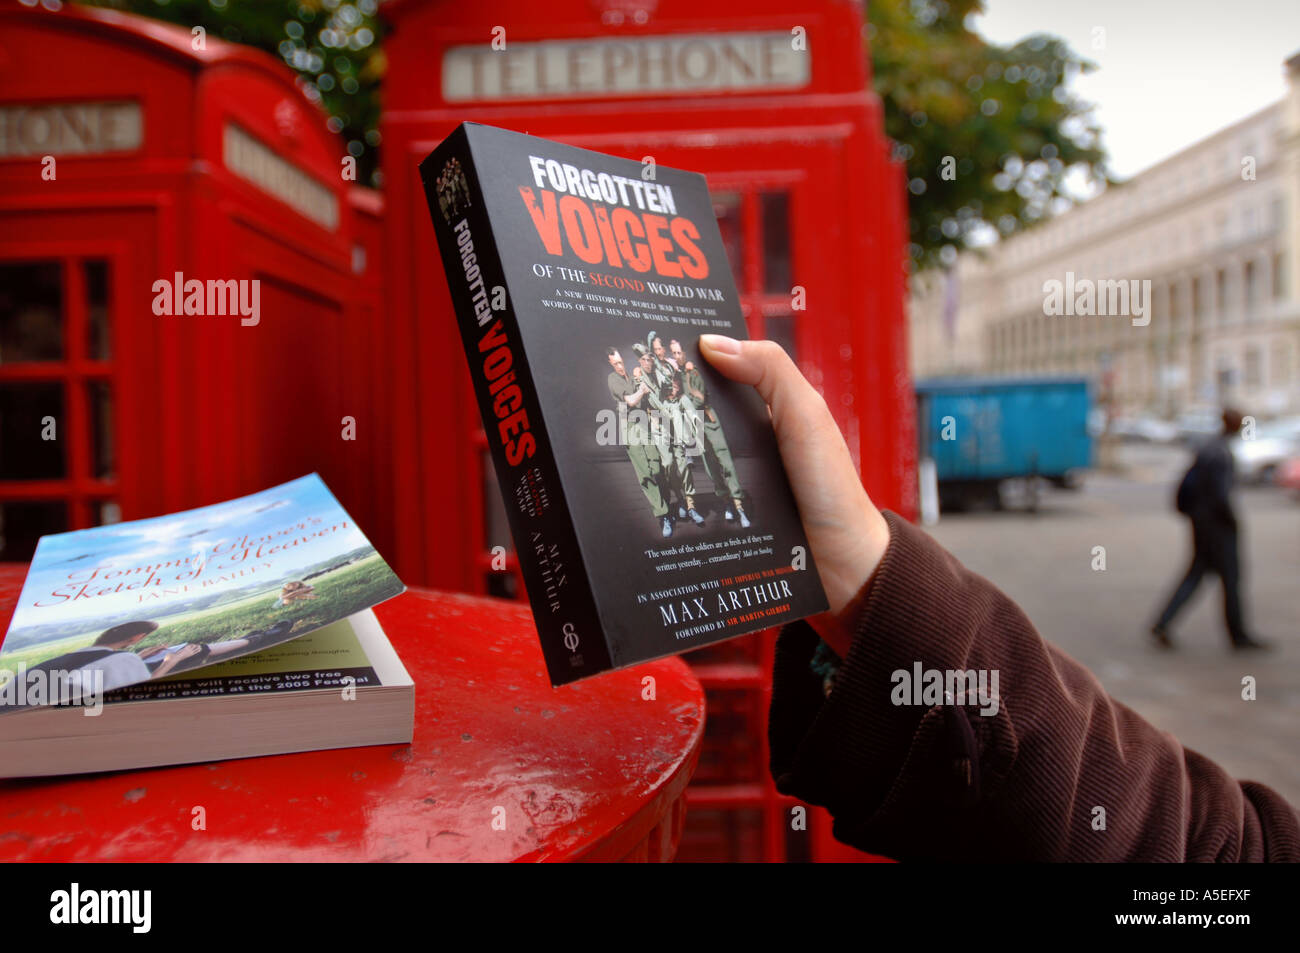 BOOKS LEFT ON A POST BOX AS PART OF THE BOOK DROP SCHEME AT THE CHELTENHAM LITERARY FESTIVAL UK Stock Photo